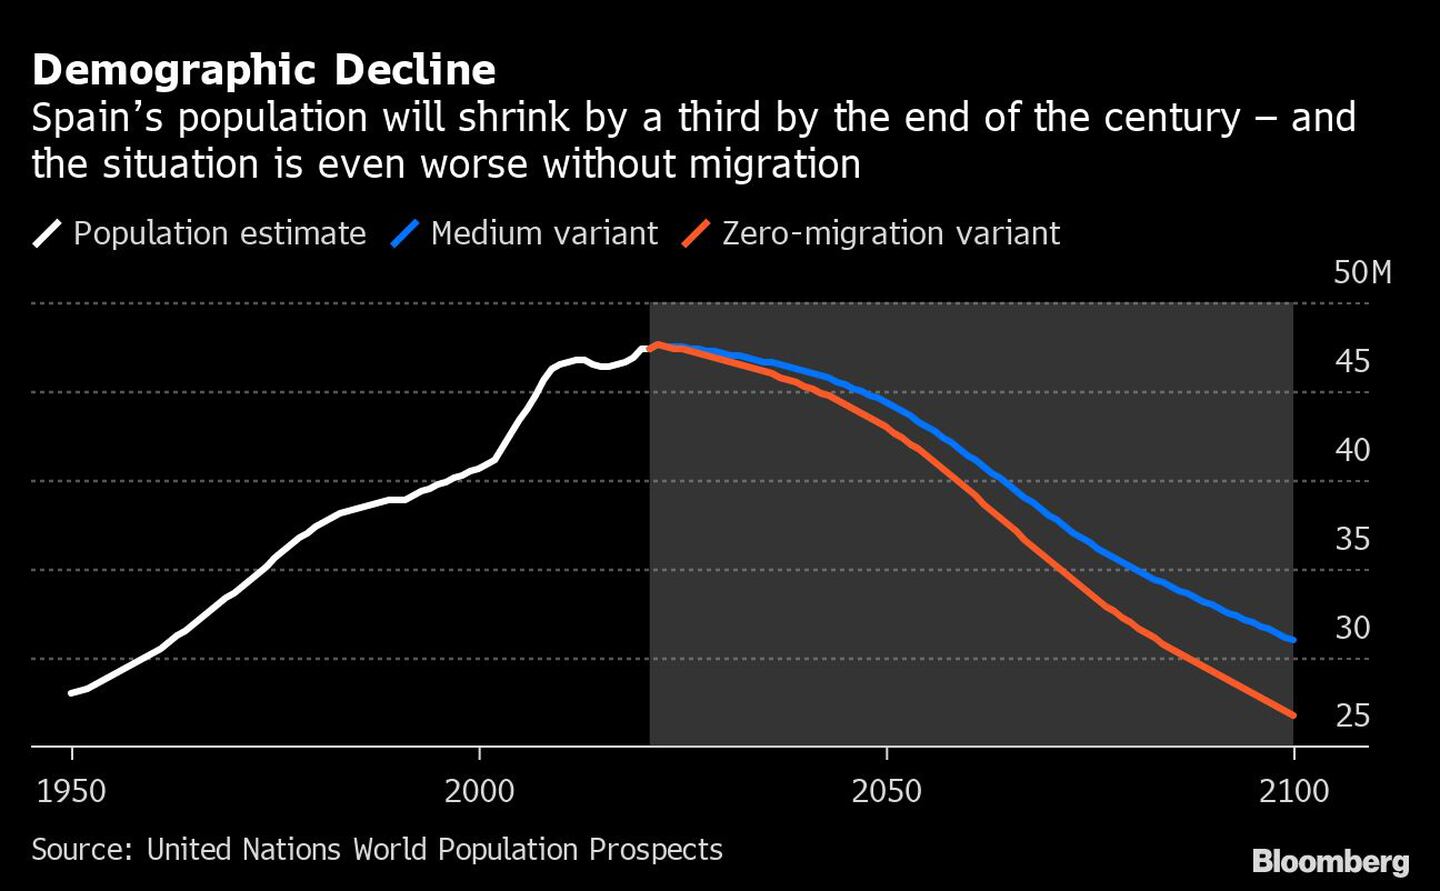 Demographic Decline | Spain's population will shrink by a third by the end of the century, and the situation would be even worse without immigrationdfd